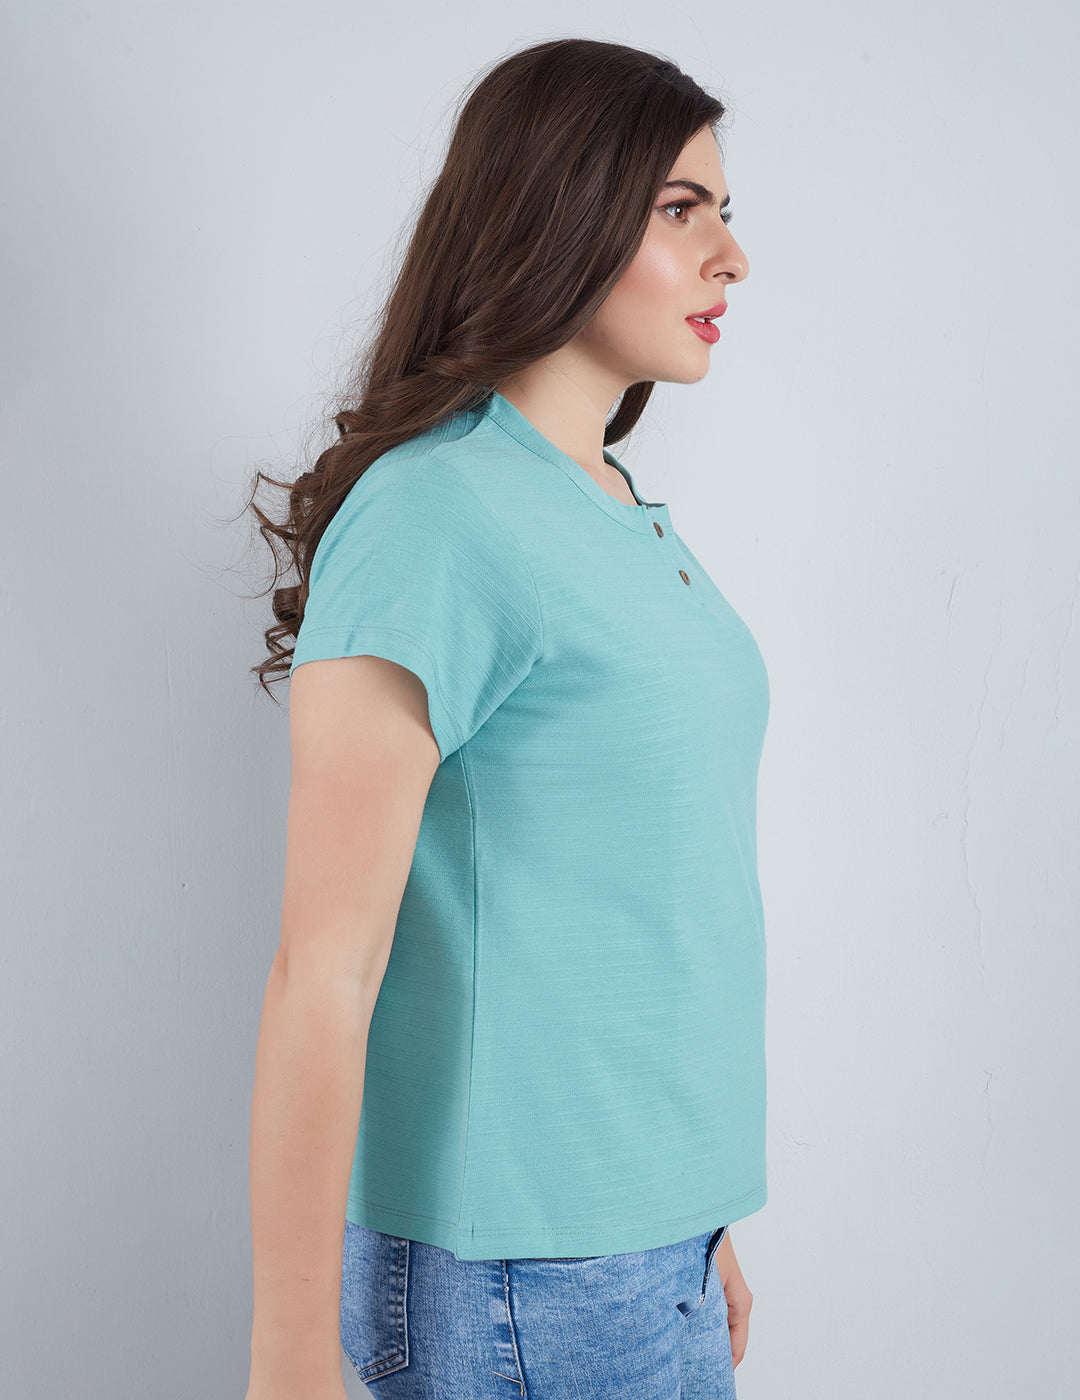 Stylish Sage Plain Cotton Short T-shirts For Women Online In India